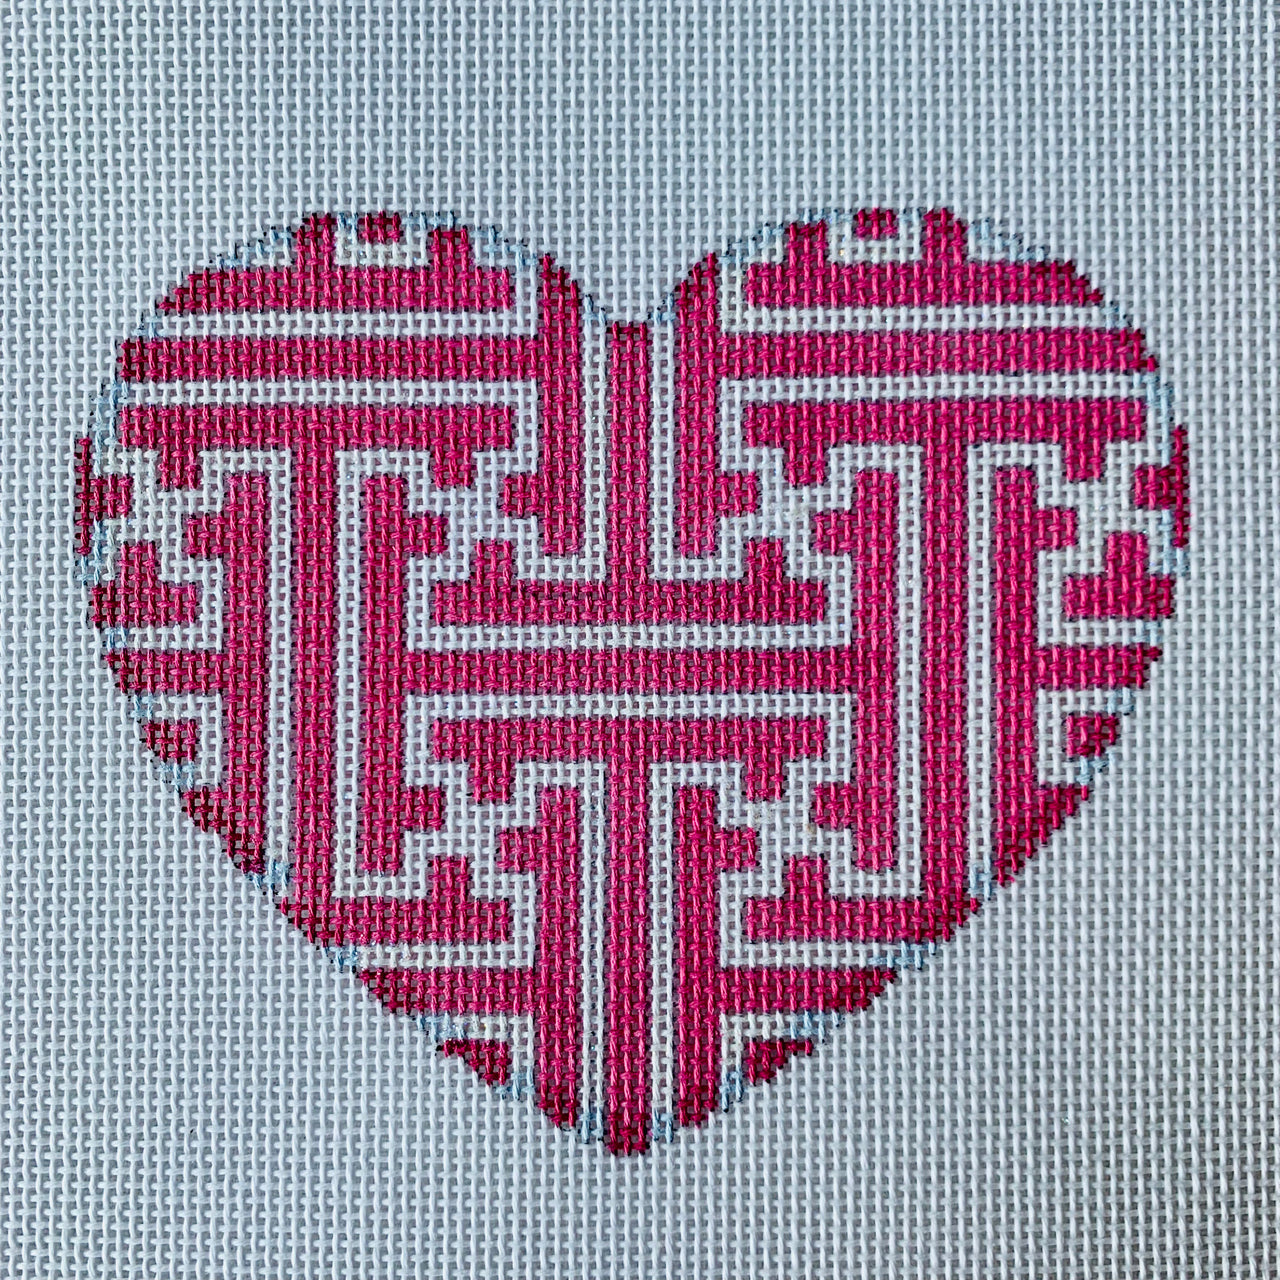 HE1017 Pink and White Lattice Heart